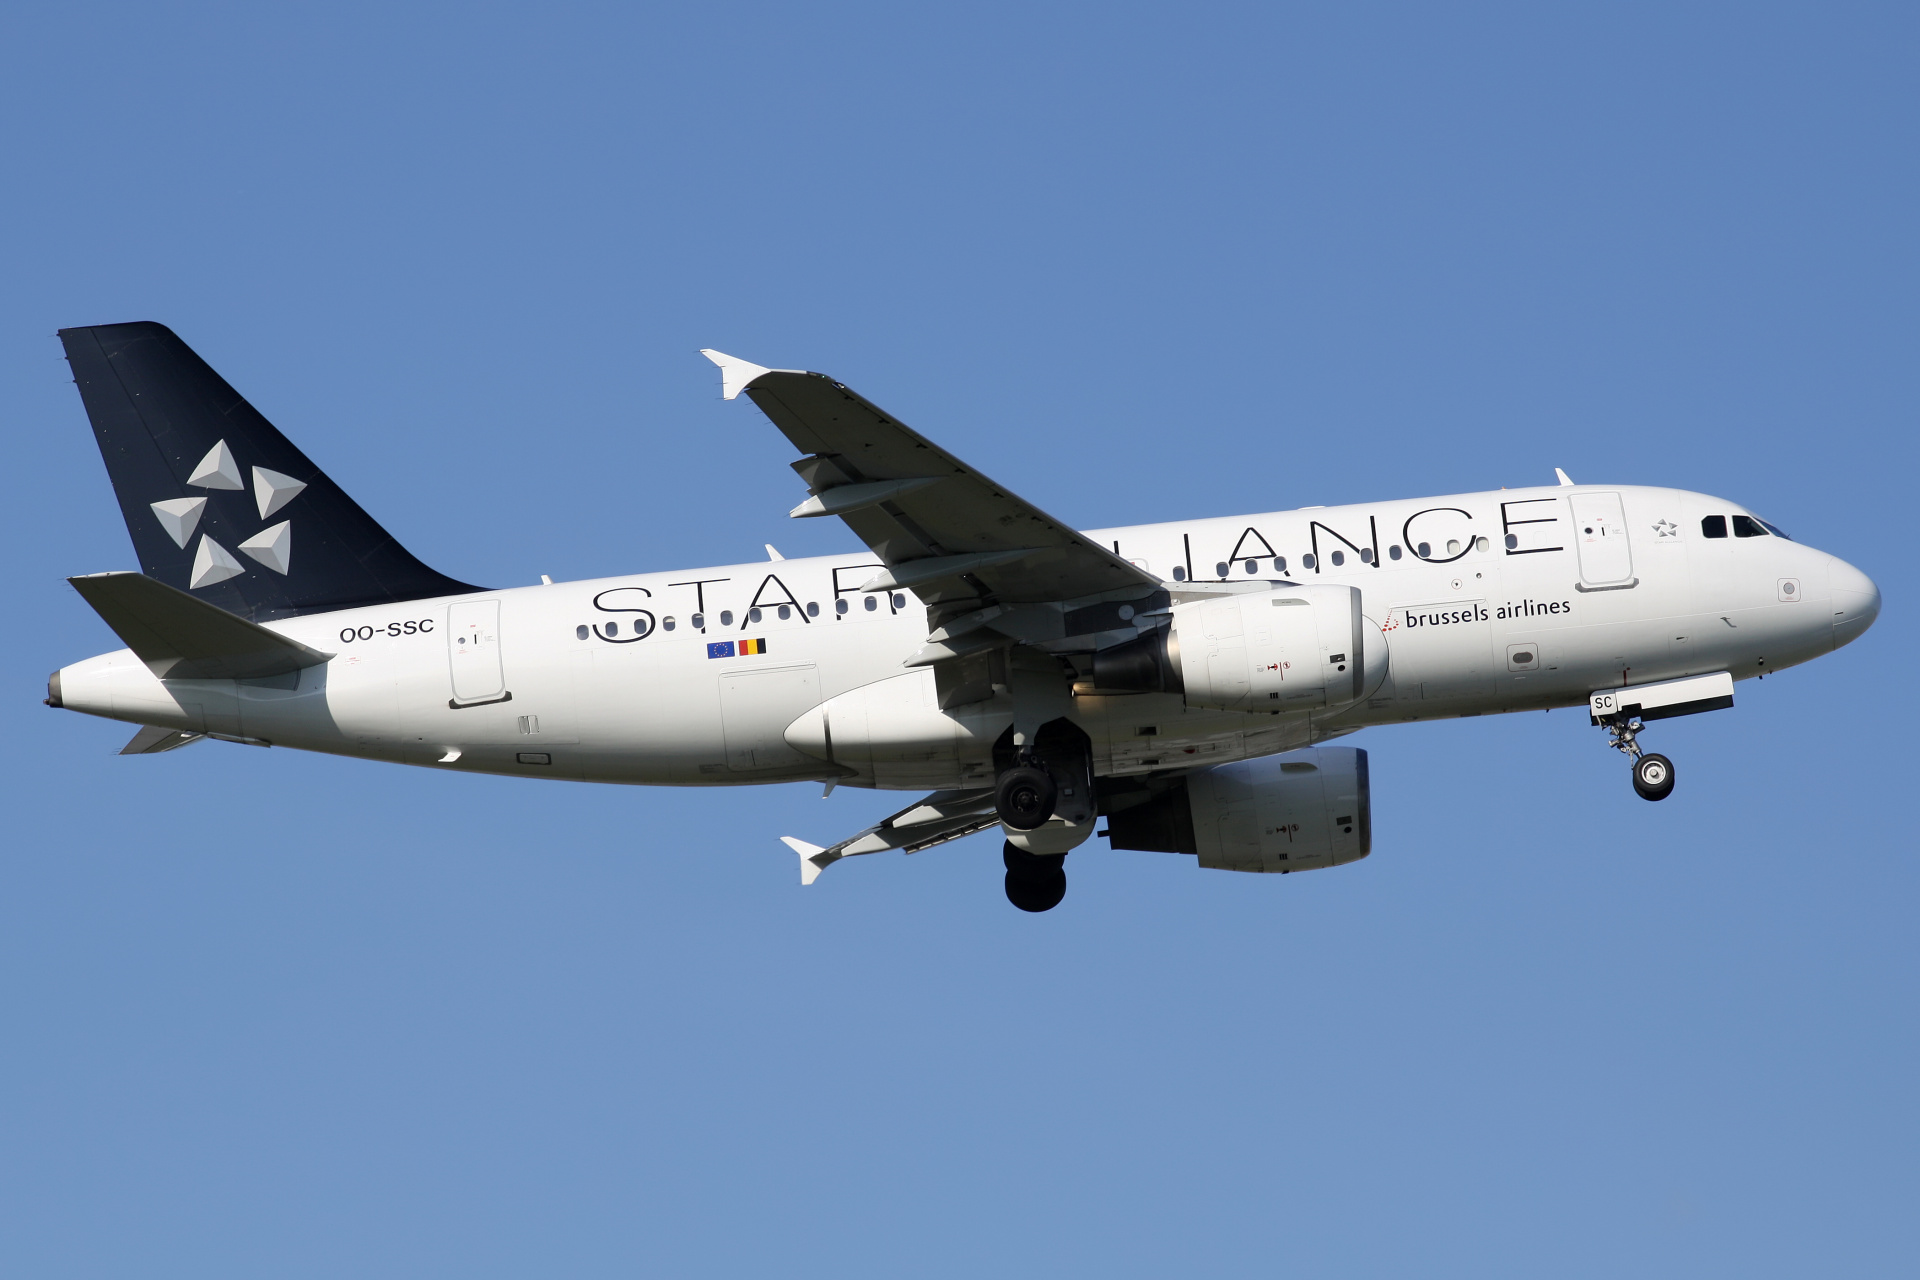 OO-SSC (Star Alliance livery) (Aircraft » EPWA Spotting » Airbus A319-100 » Brussels Airlines)